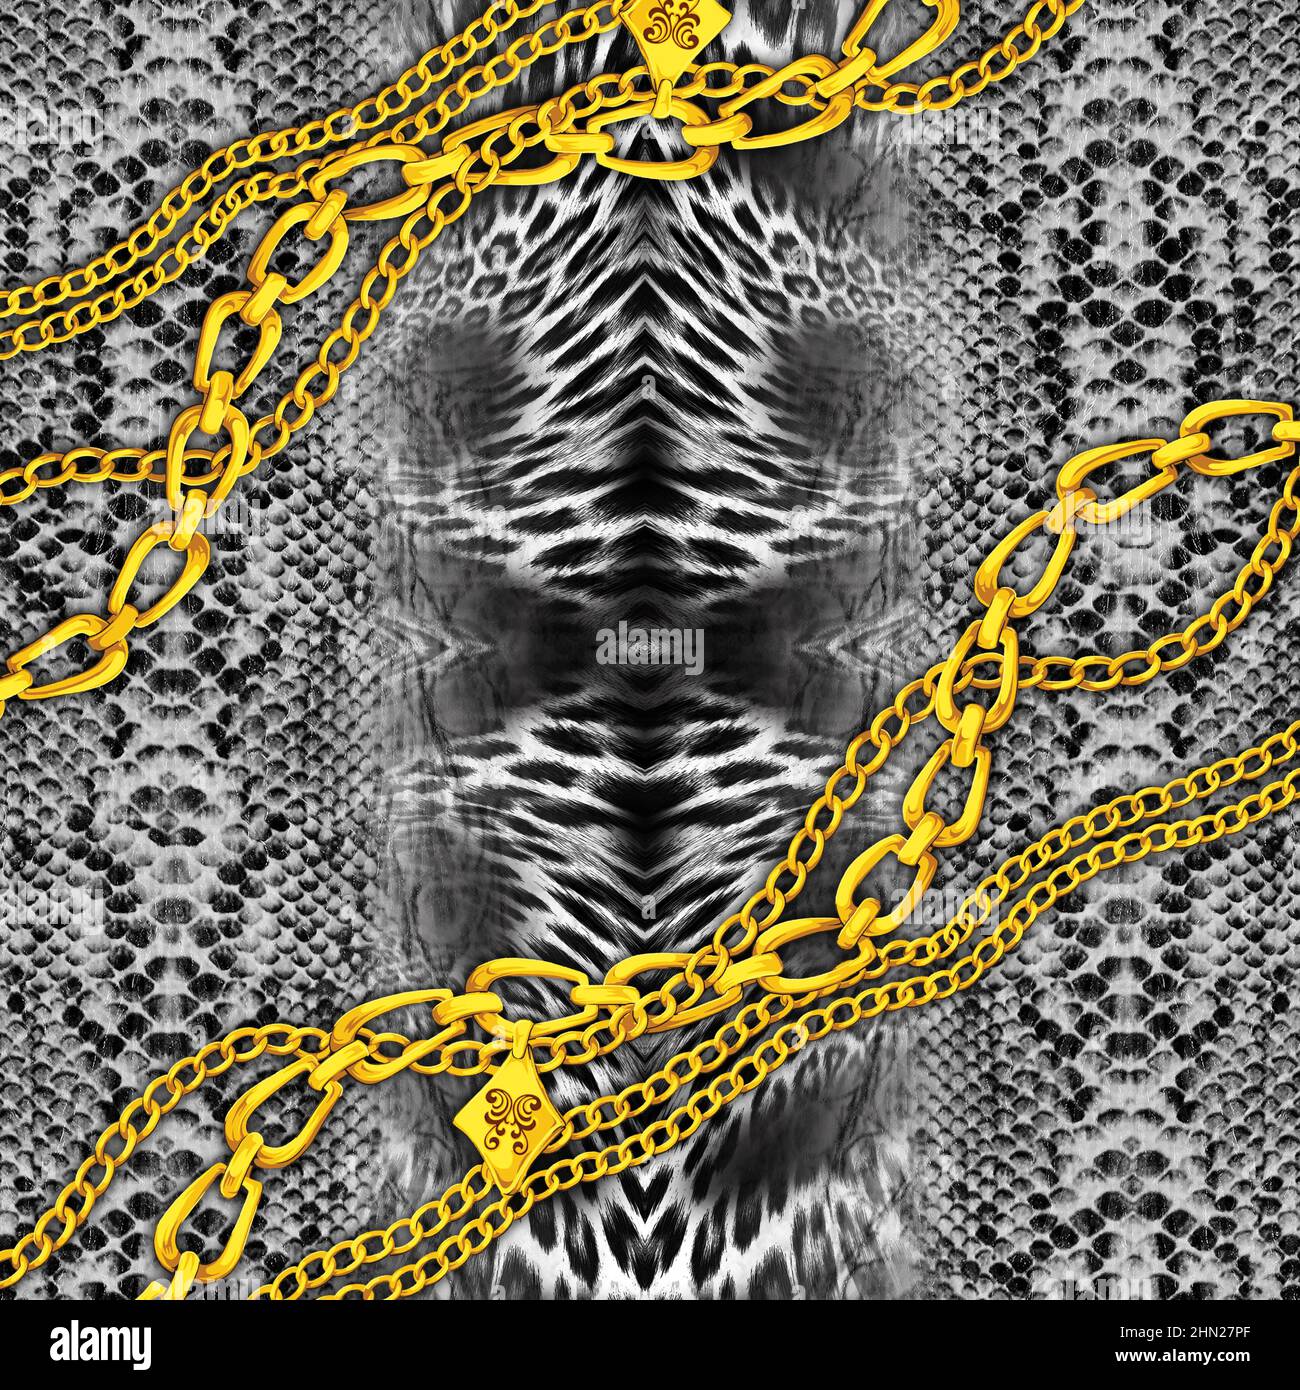 Golden Chains on Mixed Animal Skin Background Ready for Textile Prints. Stock Photo